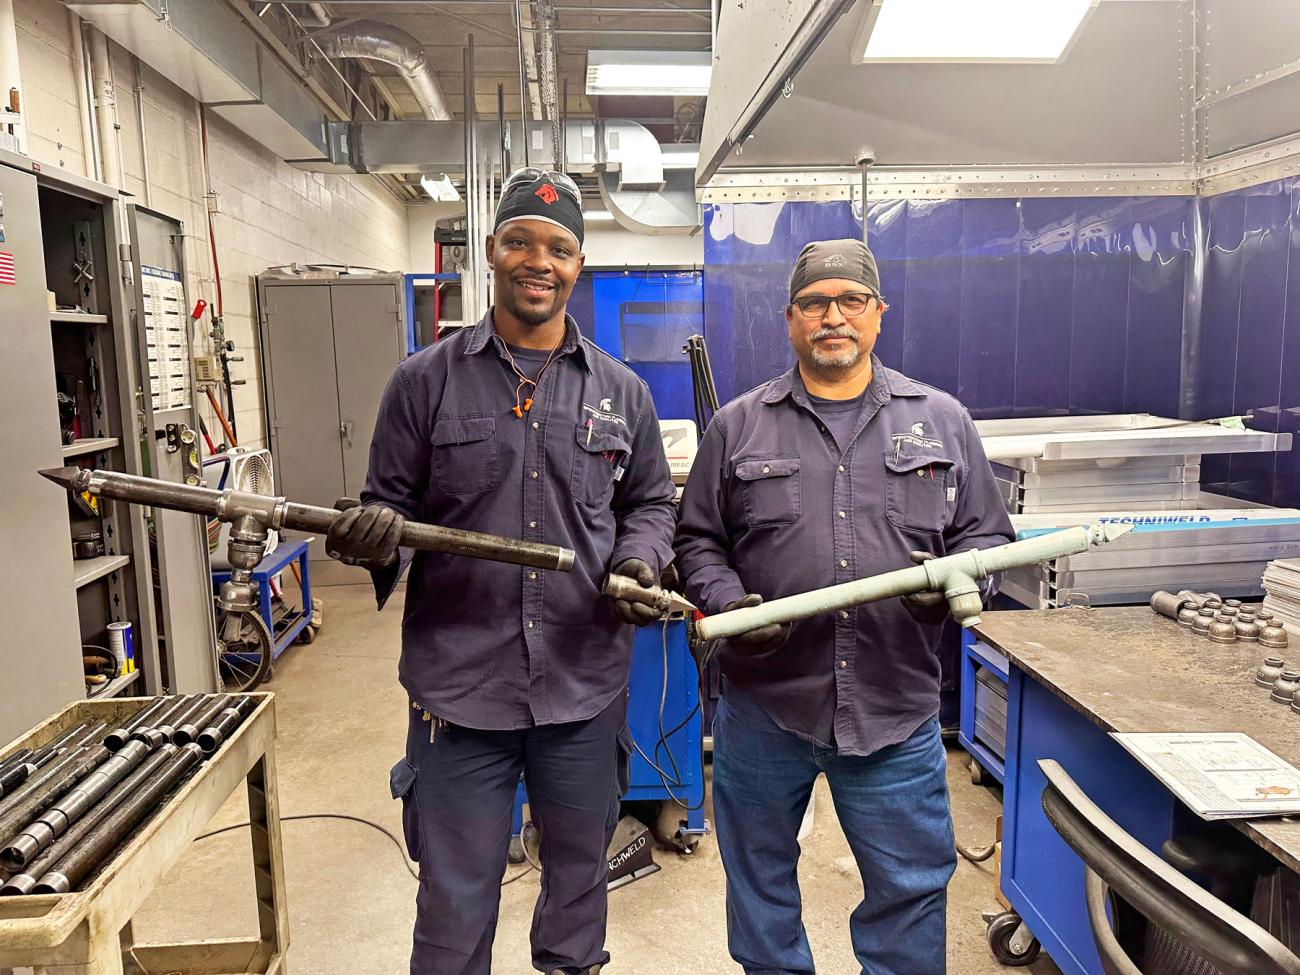 Two metalworkers smile at the camera